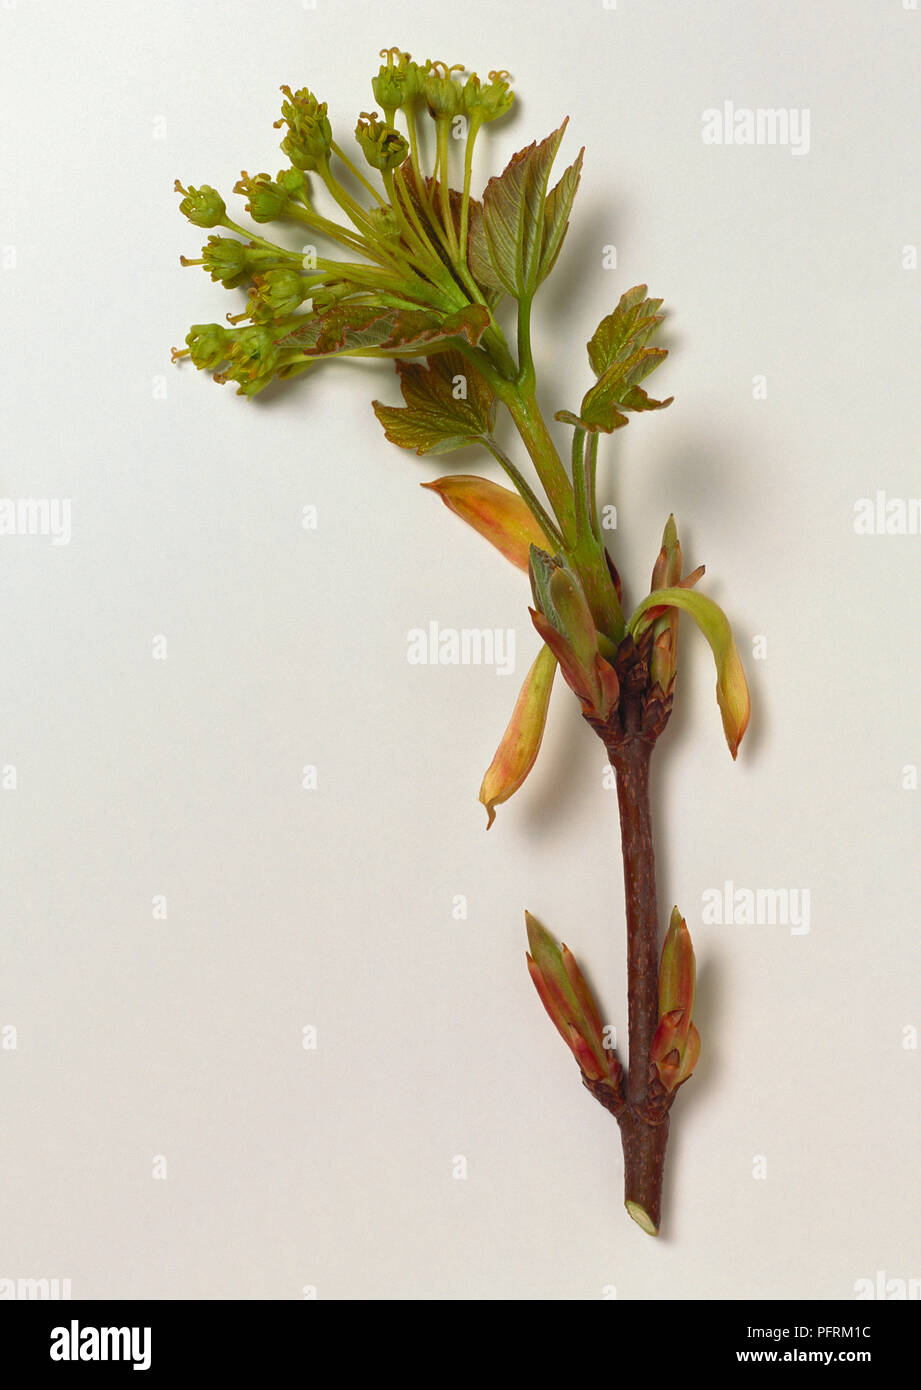 Acer opalus (Italian maple), stem tip showing cluster of light green spring flowers and emerging immature leaves Stock Photo